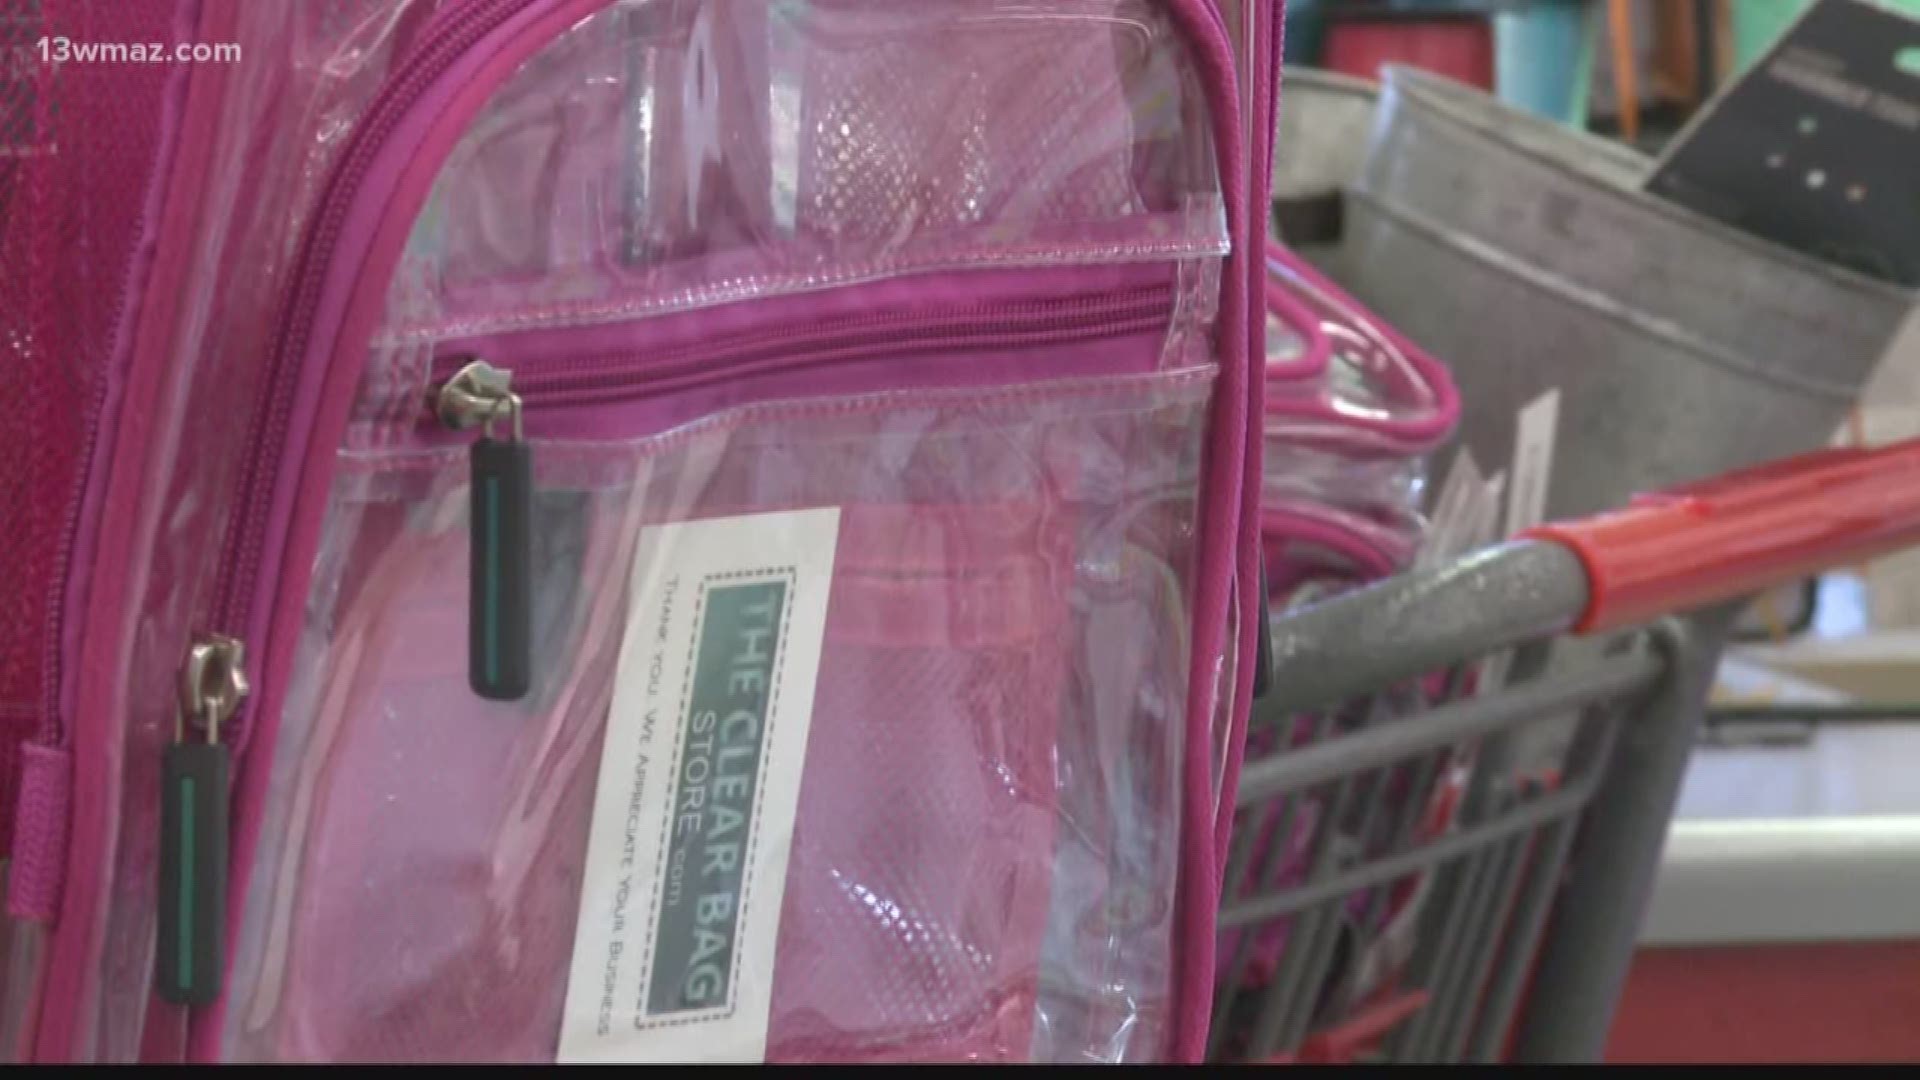 Clear, mesh bags become new school policy